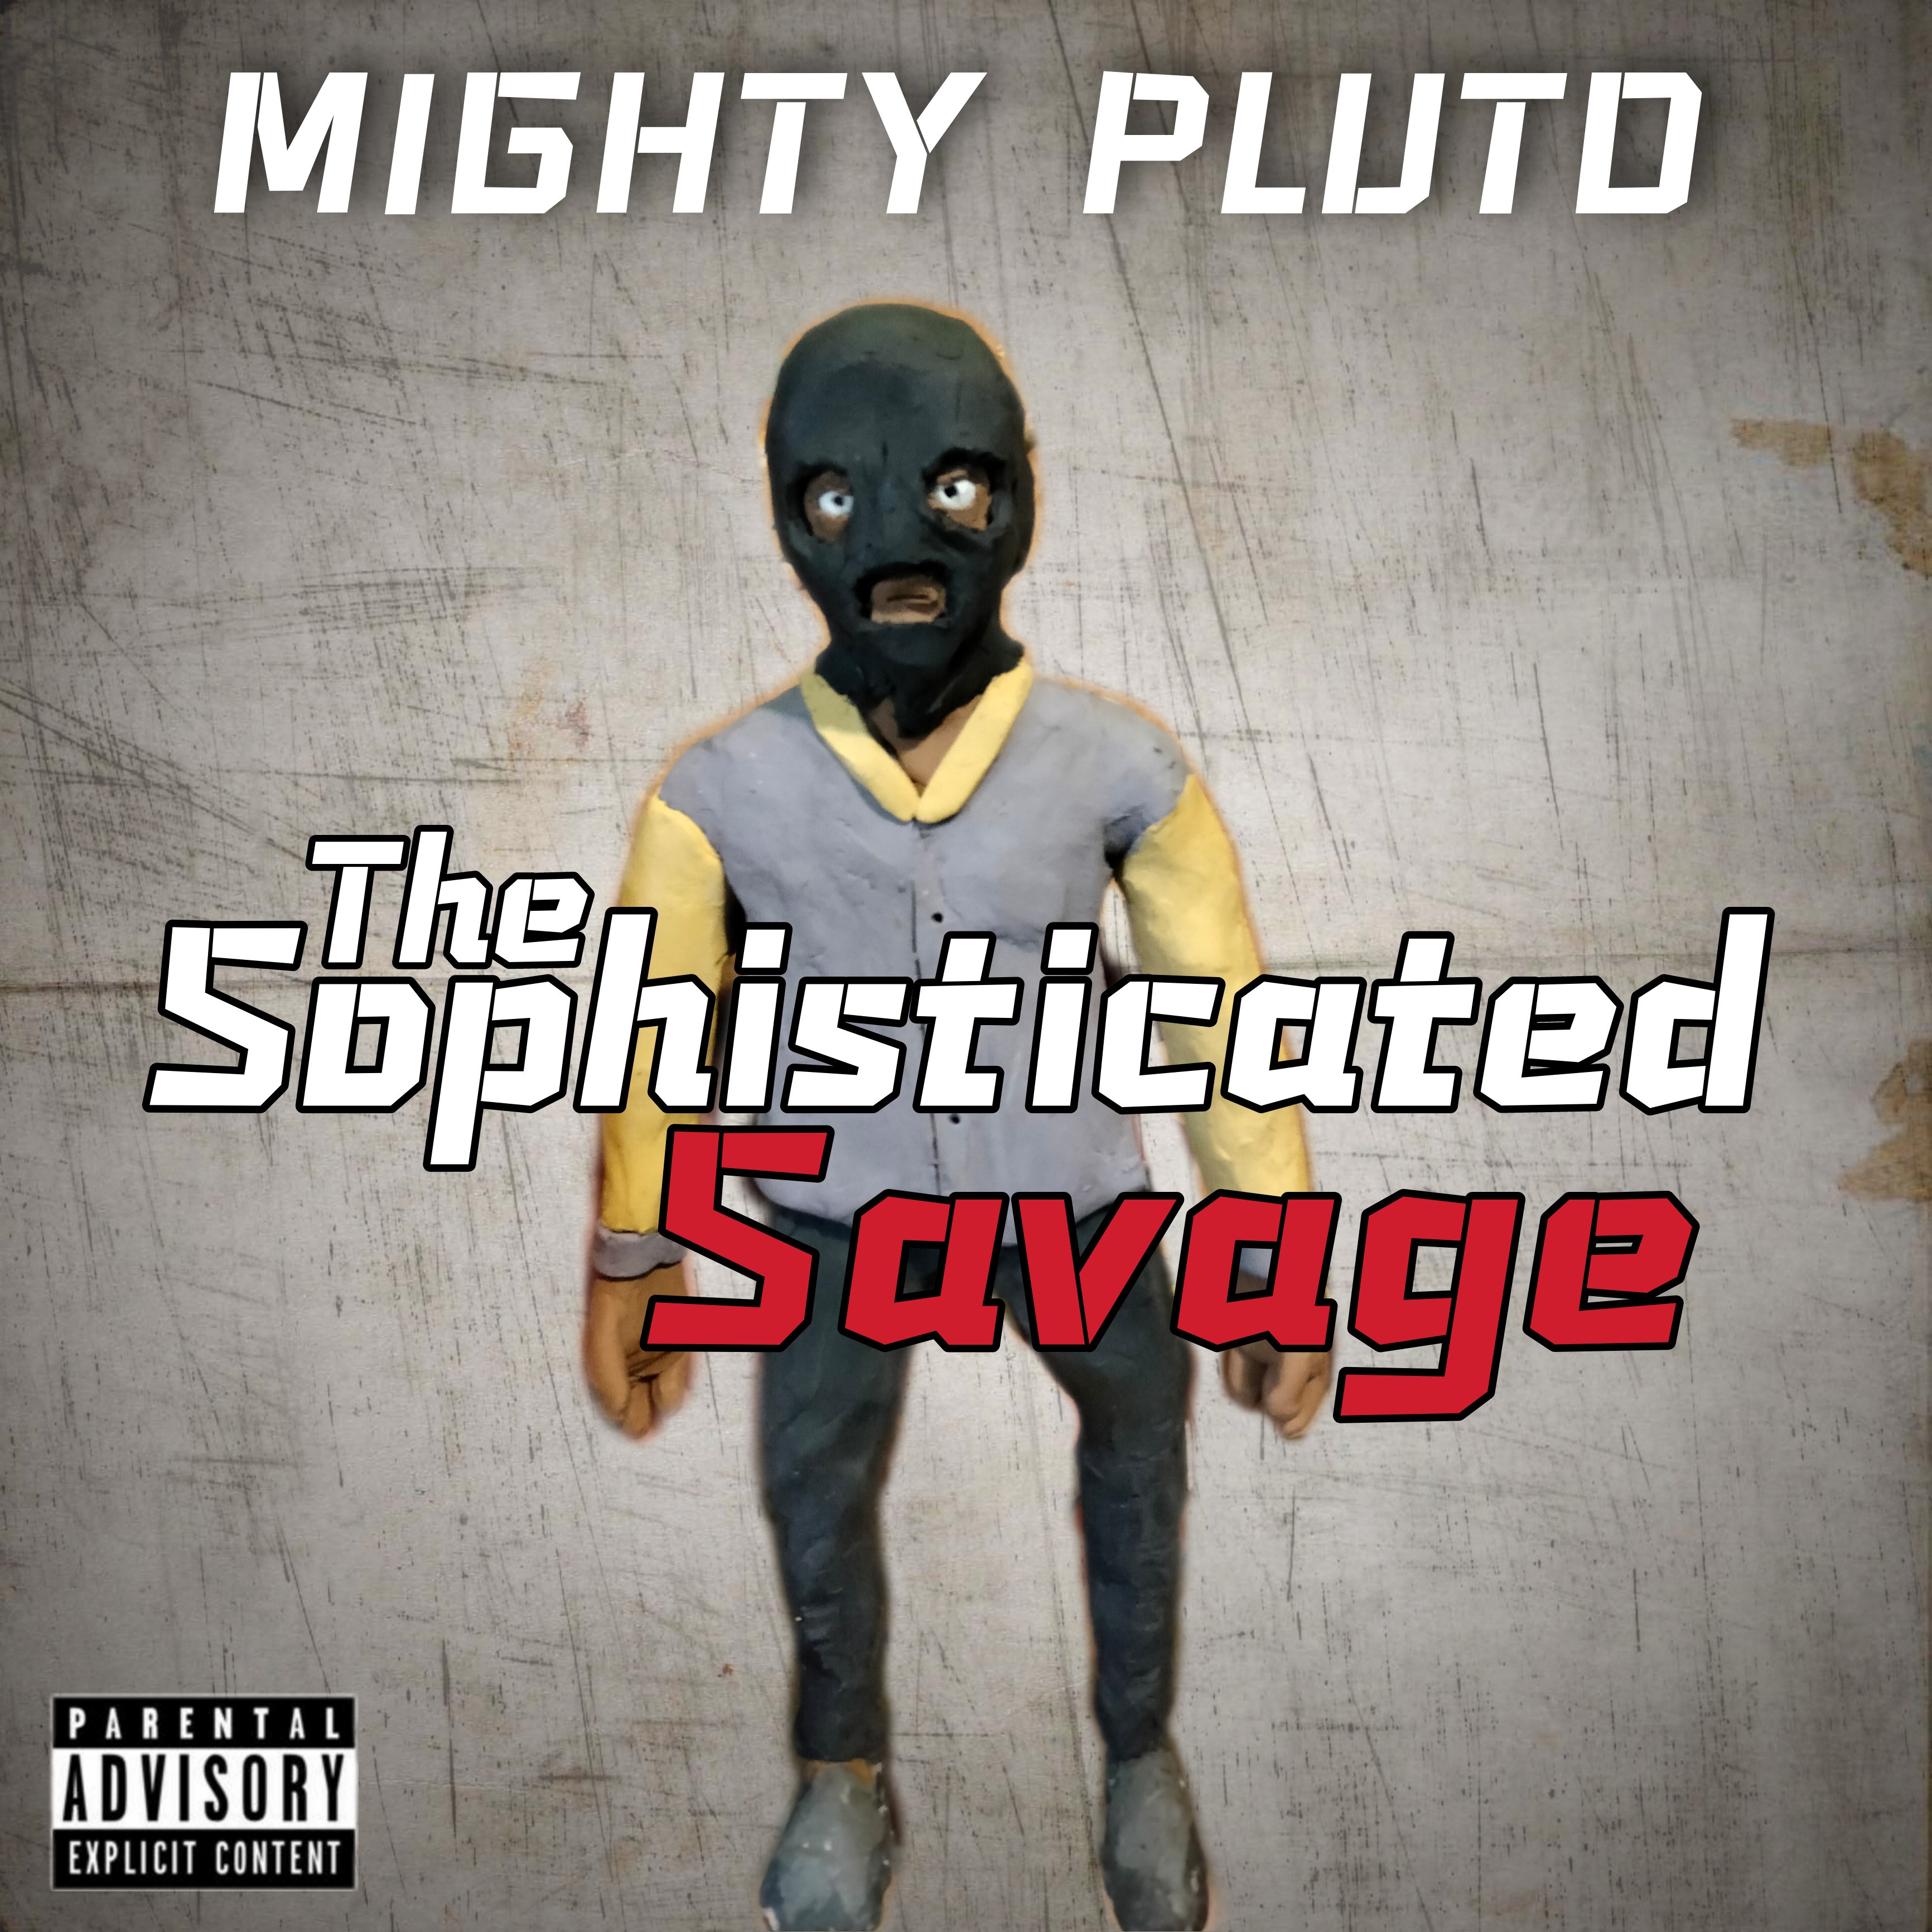 Mighty PLUTO Is The Ultimate Superhero In “The Sophisticated Savage”